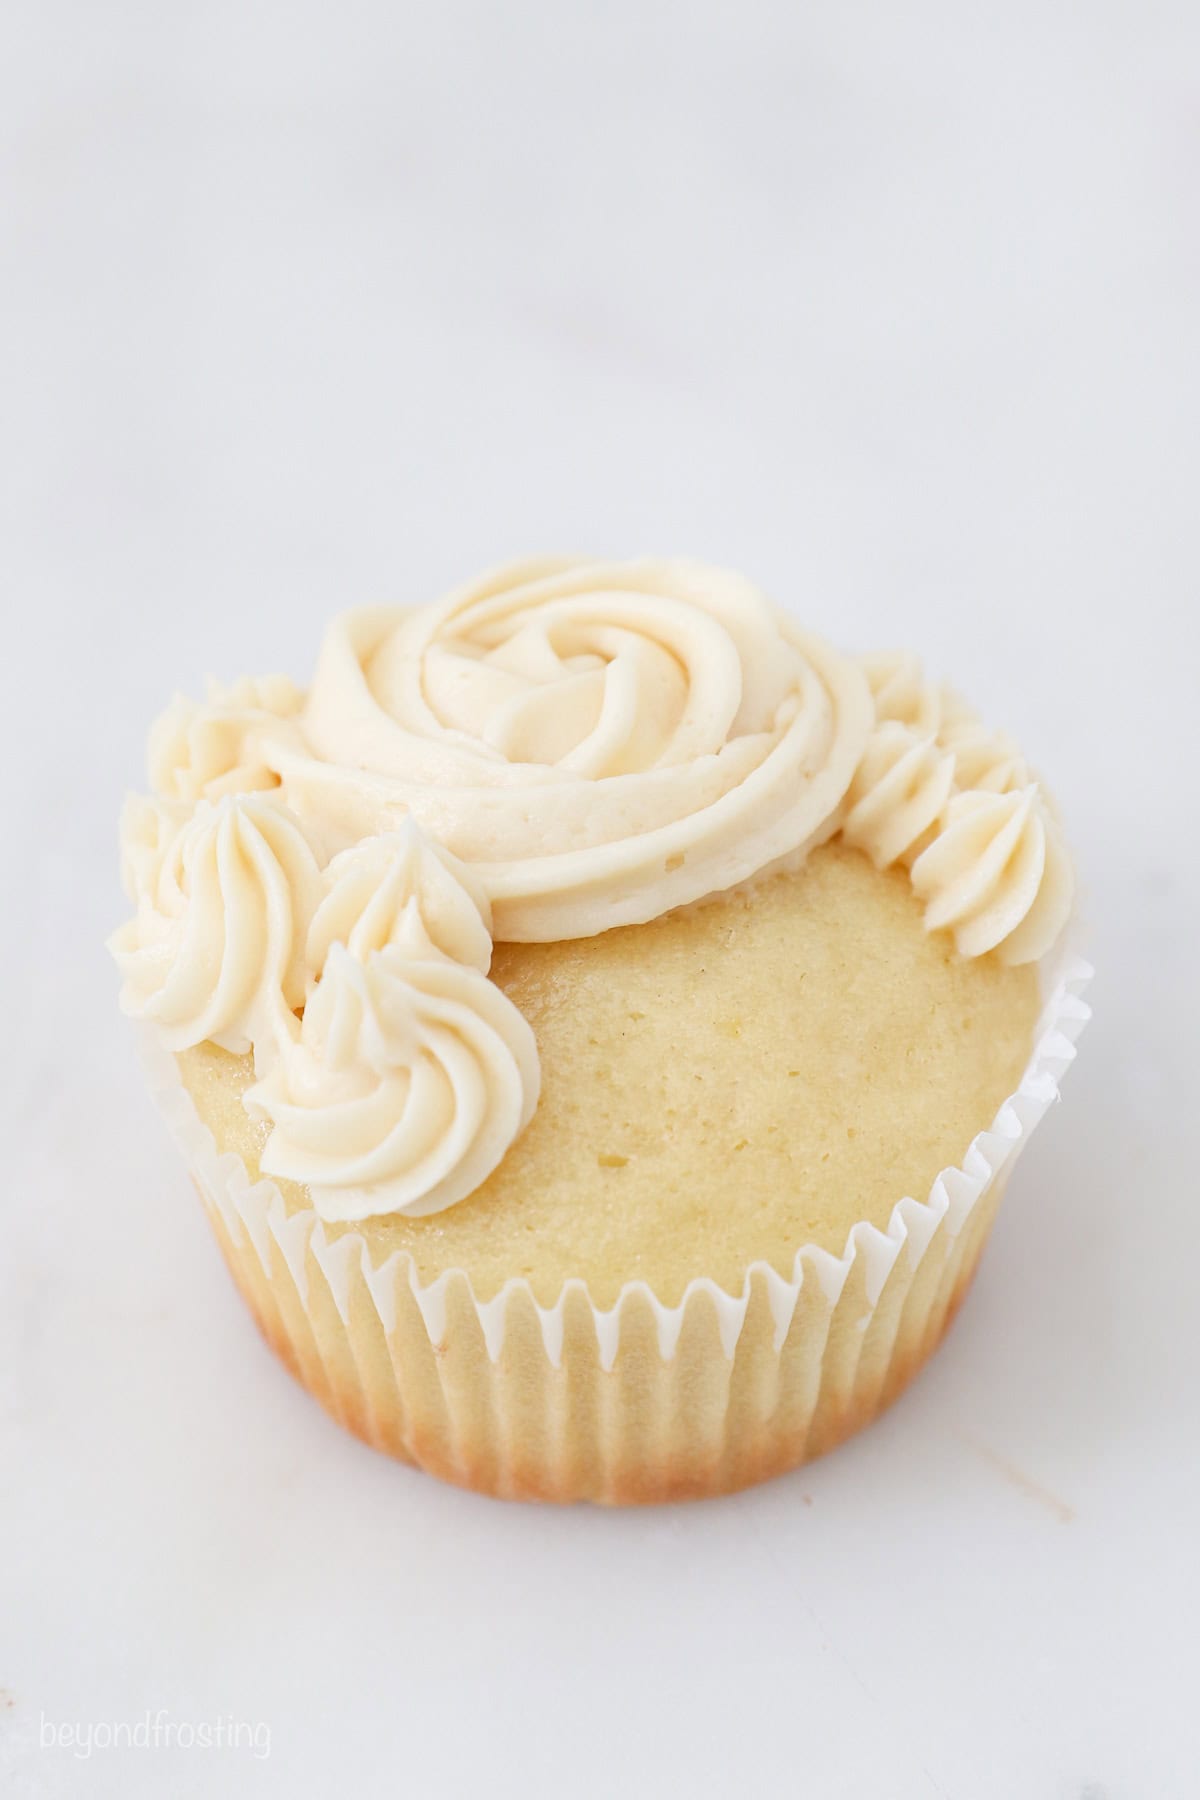 A cupcake partially frosted with vanilla frosting swirls and rosettes.